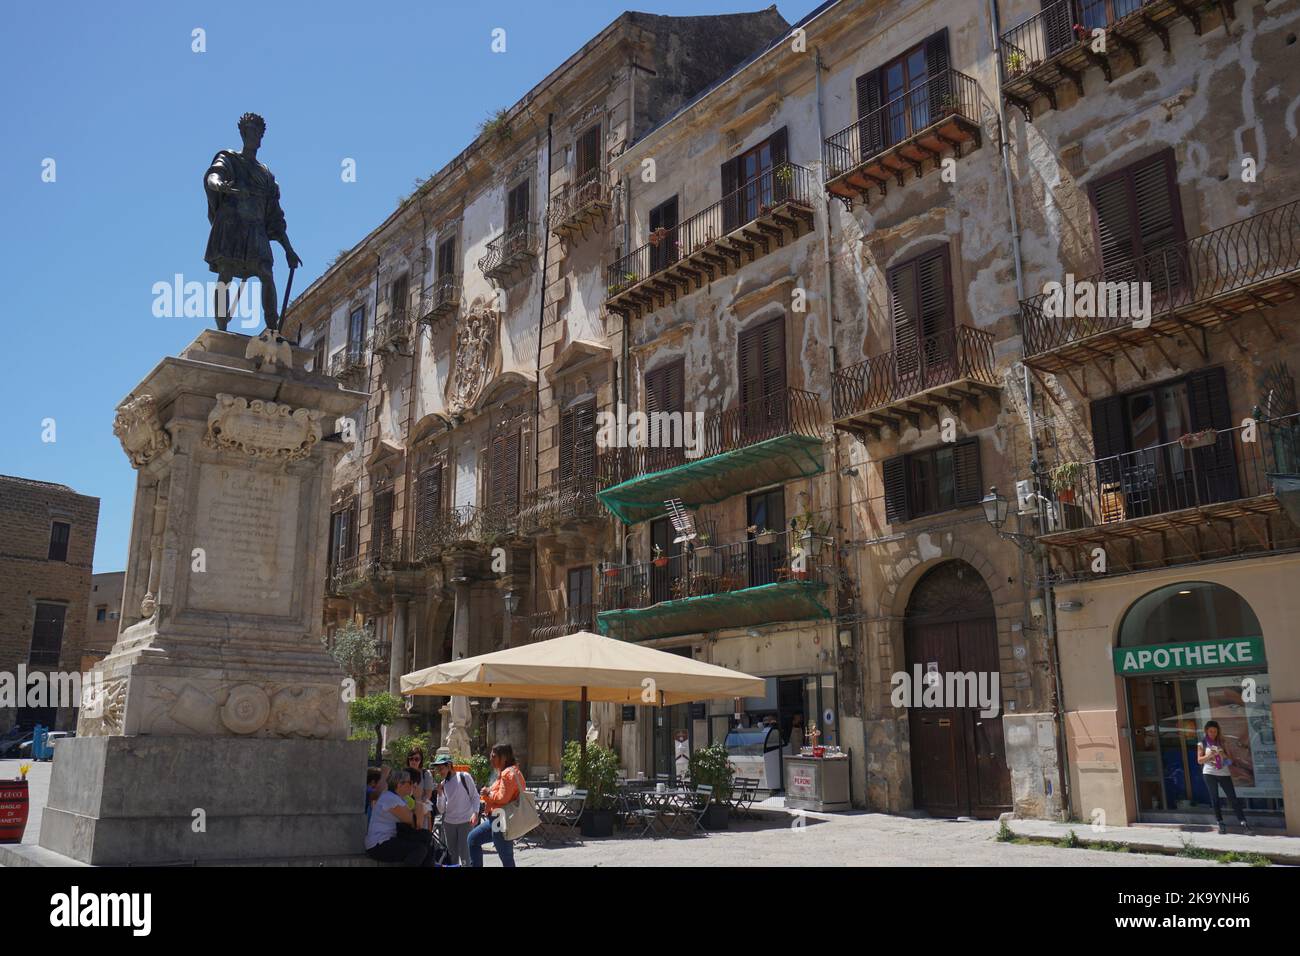 The Charles V Monument, a monumental sculpture erected in 1631 on Piazza Bologni in Palermo, Sicily Stock Photo